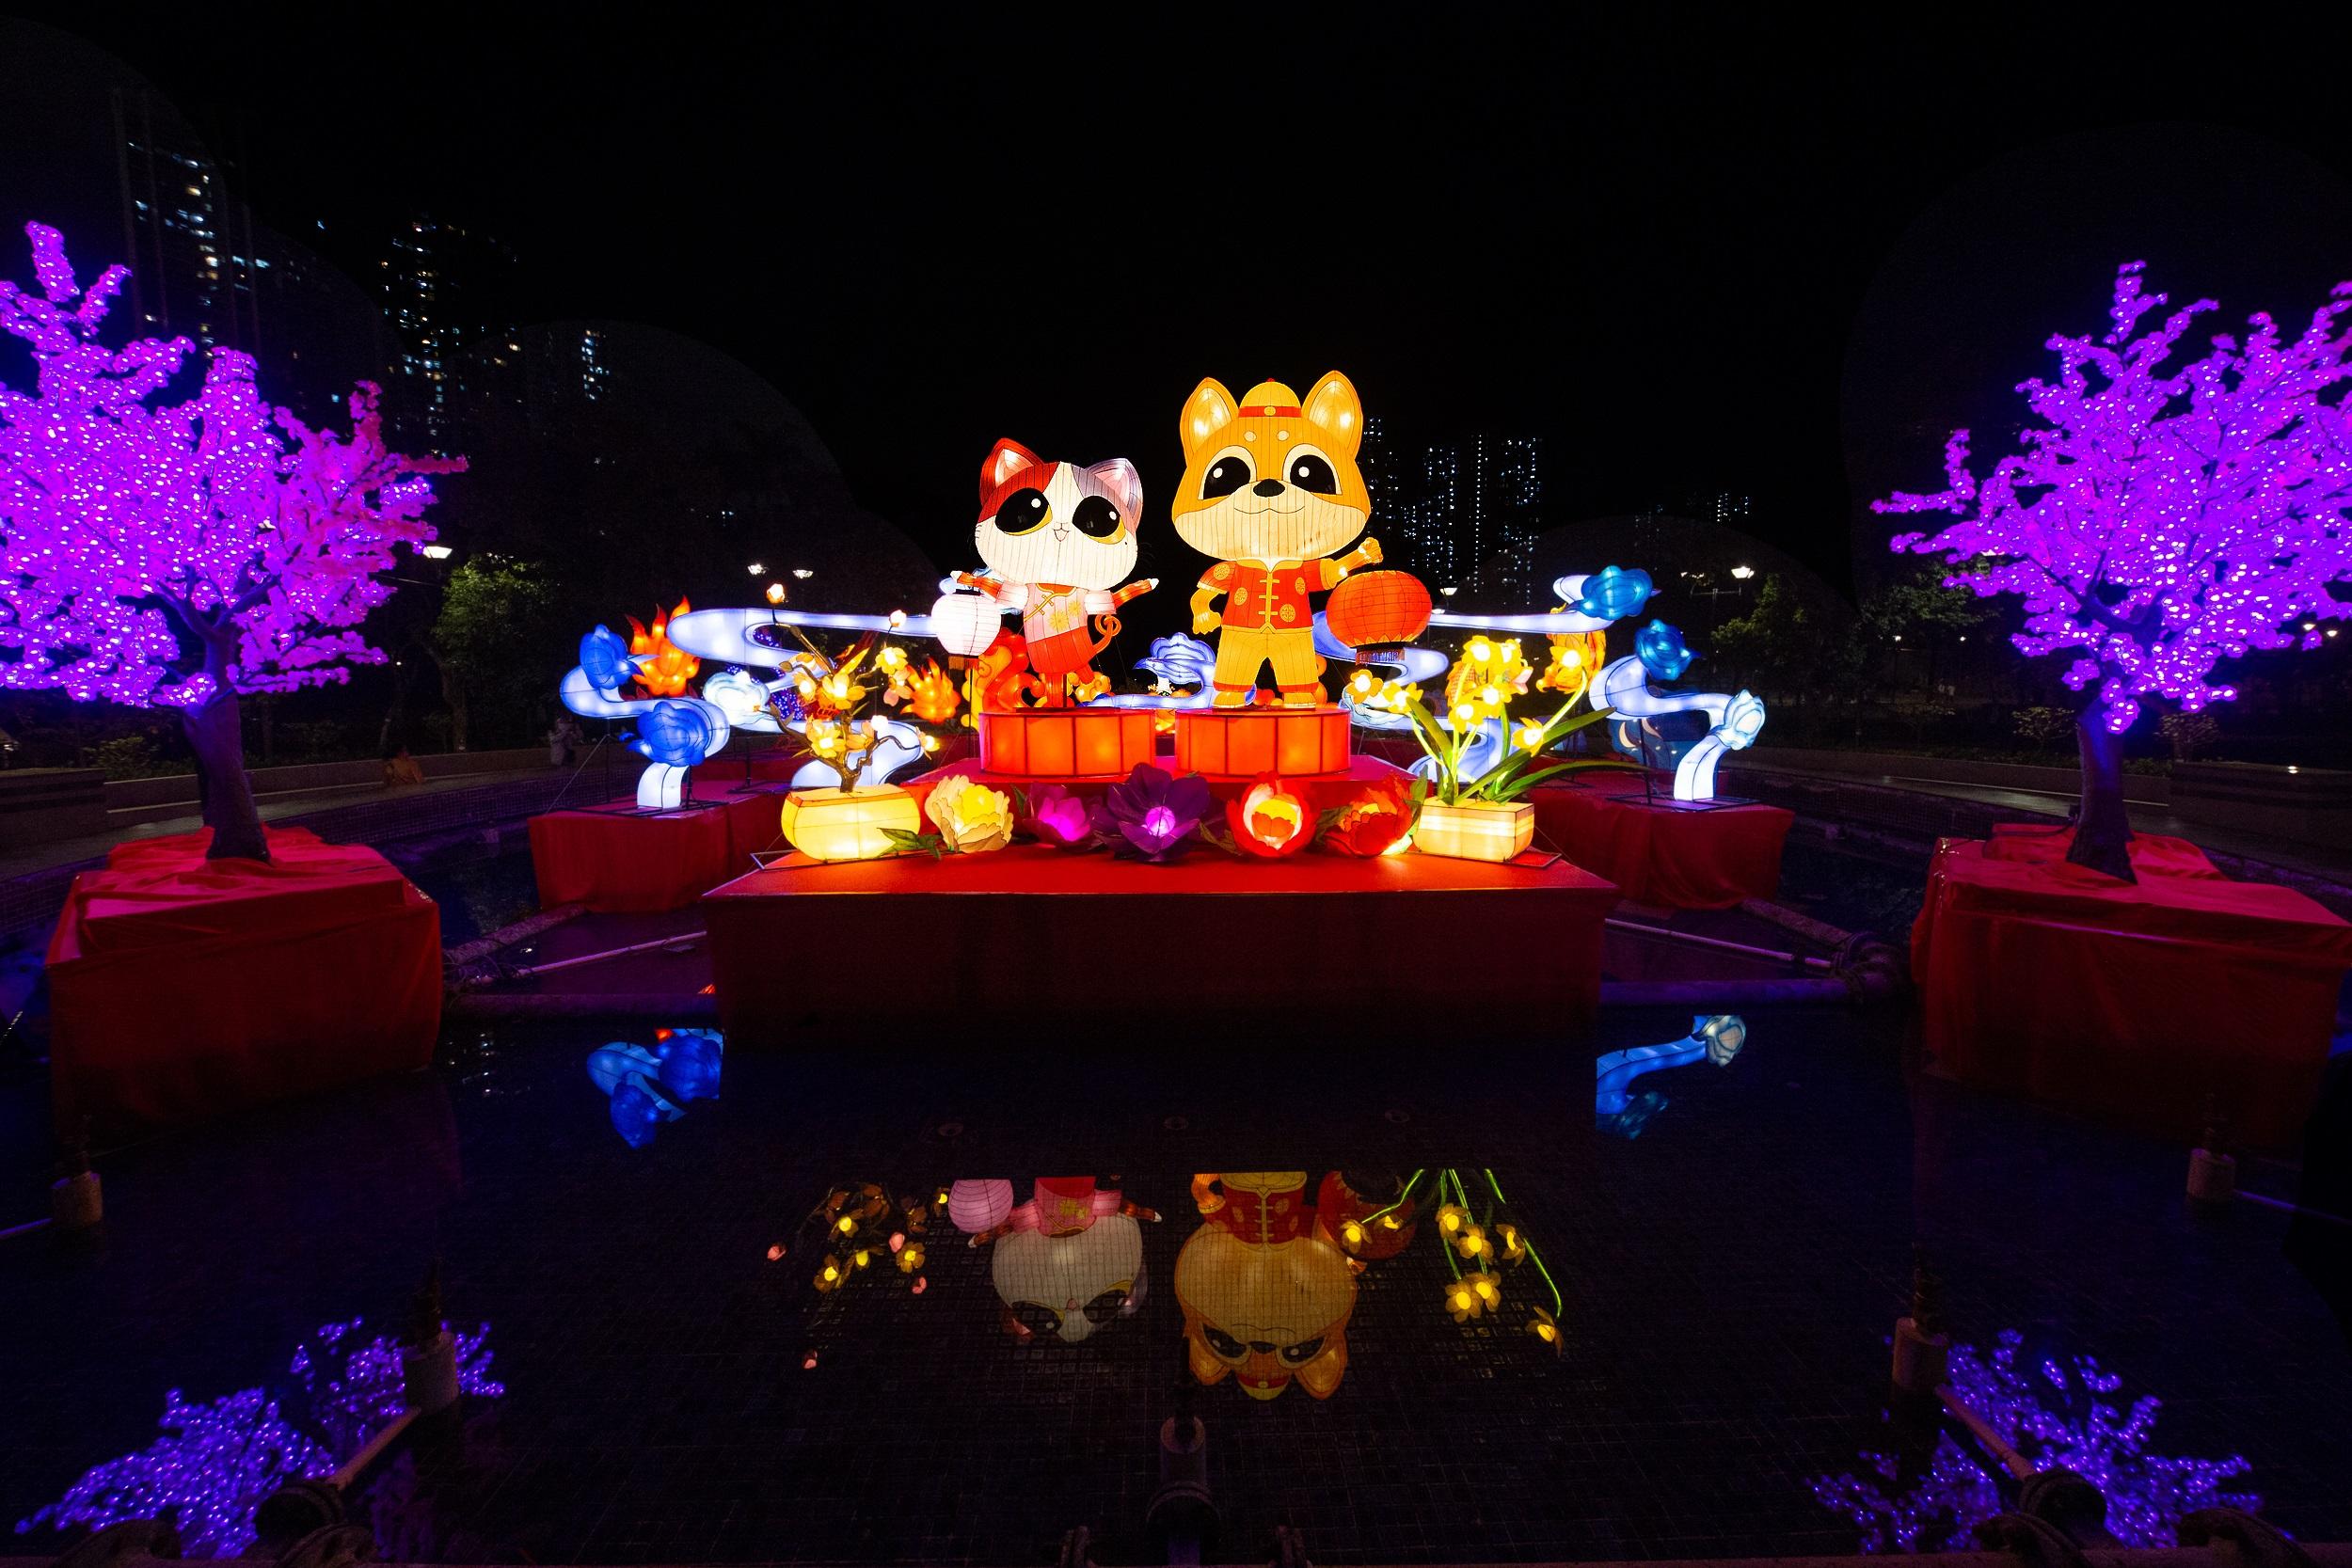 To celebrate the festive season with the public, the Leisure and Cultural Services Department is presenting the Lunar New Year Lantern Carnivals at the Hong Kong Cultural Centre Piazza, Hong Kong Velodrome Park, Tin Shui Wai Park and Ginza Square from today (February 20) until February 25. Picture shows colourful lanterns at Tin Shui Wai Park and Ginza Square.